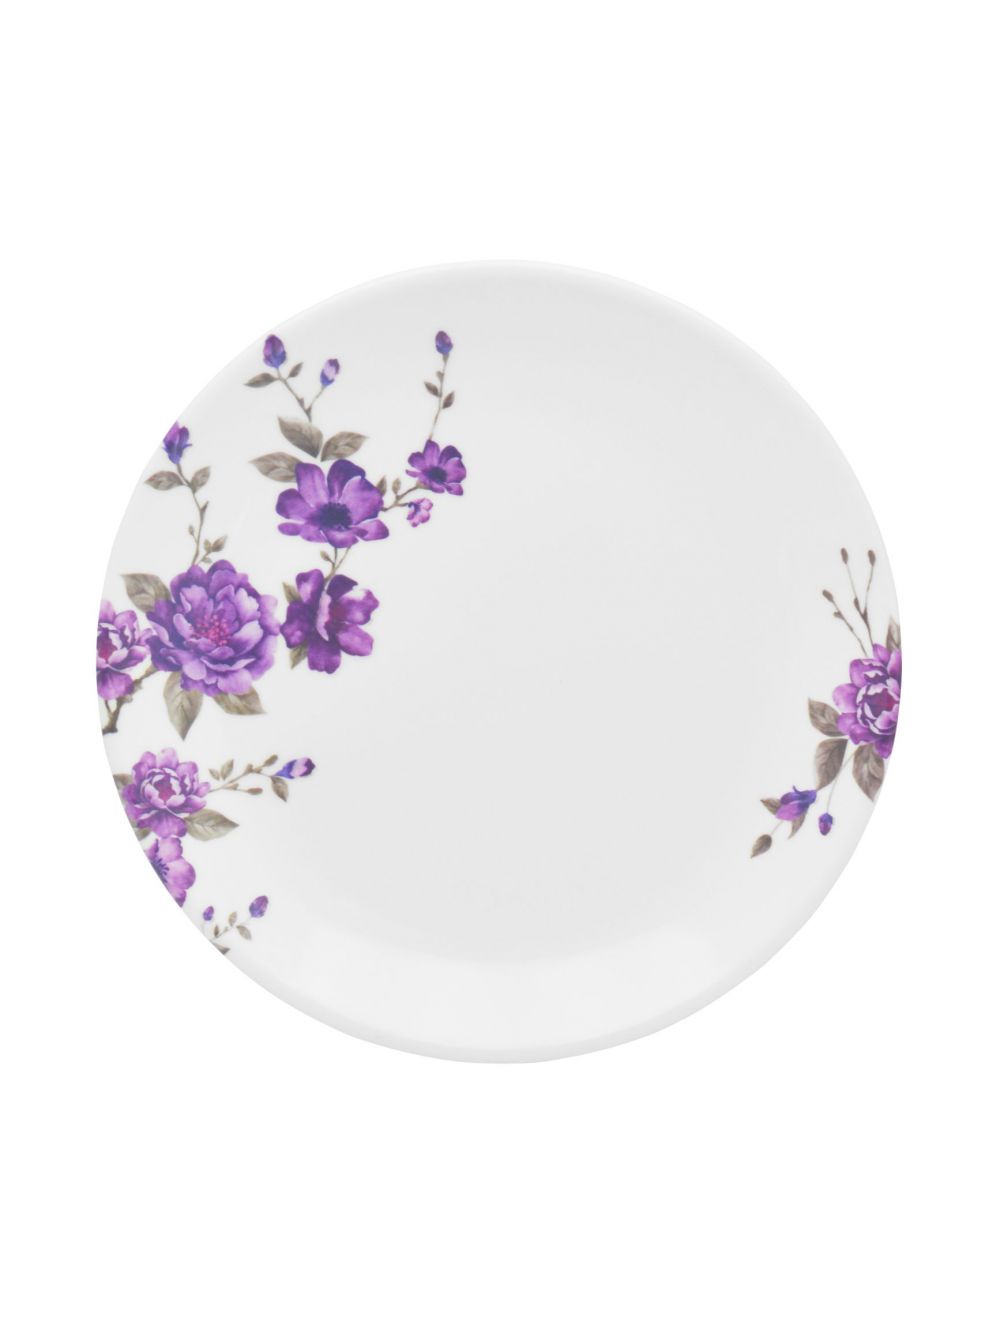 Dinewell Melamine Side Plate Blossom-DWHP3090BL